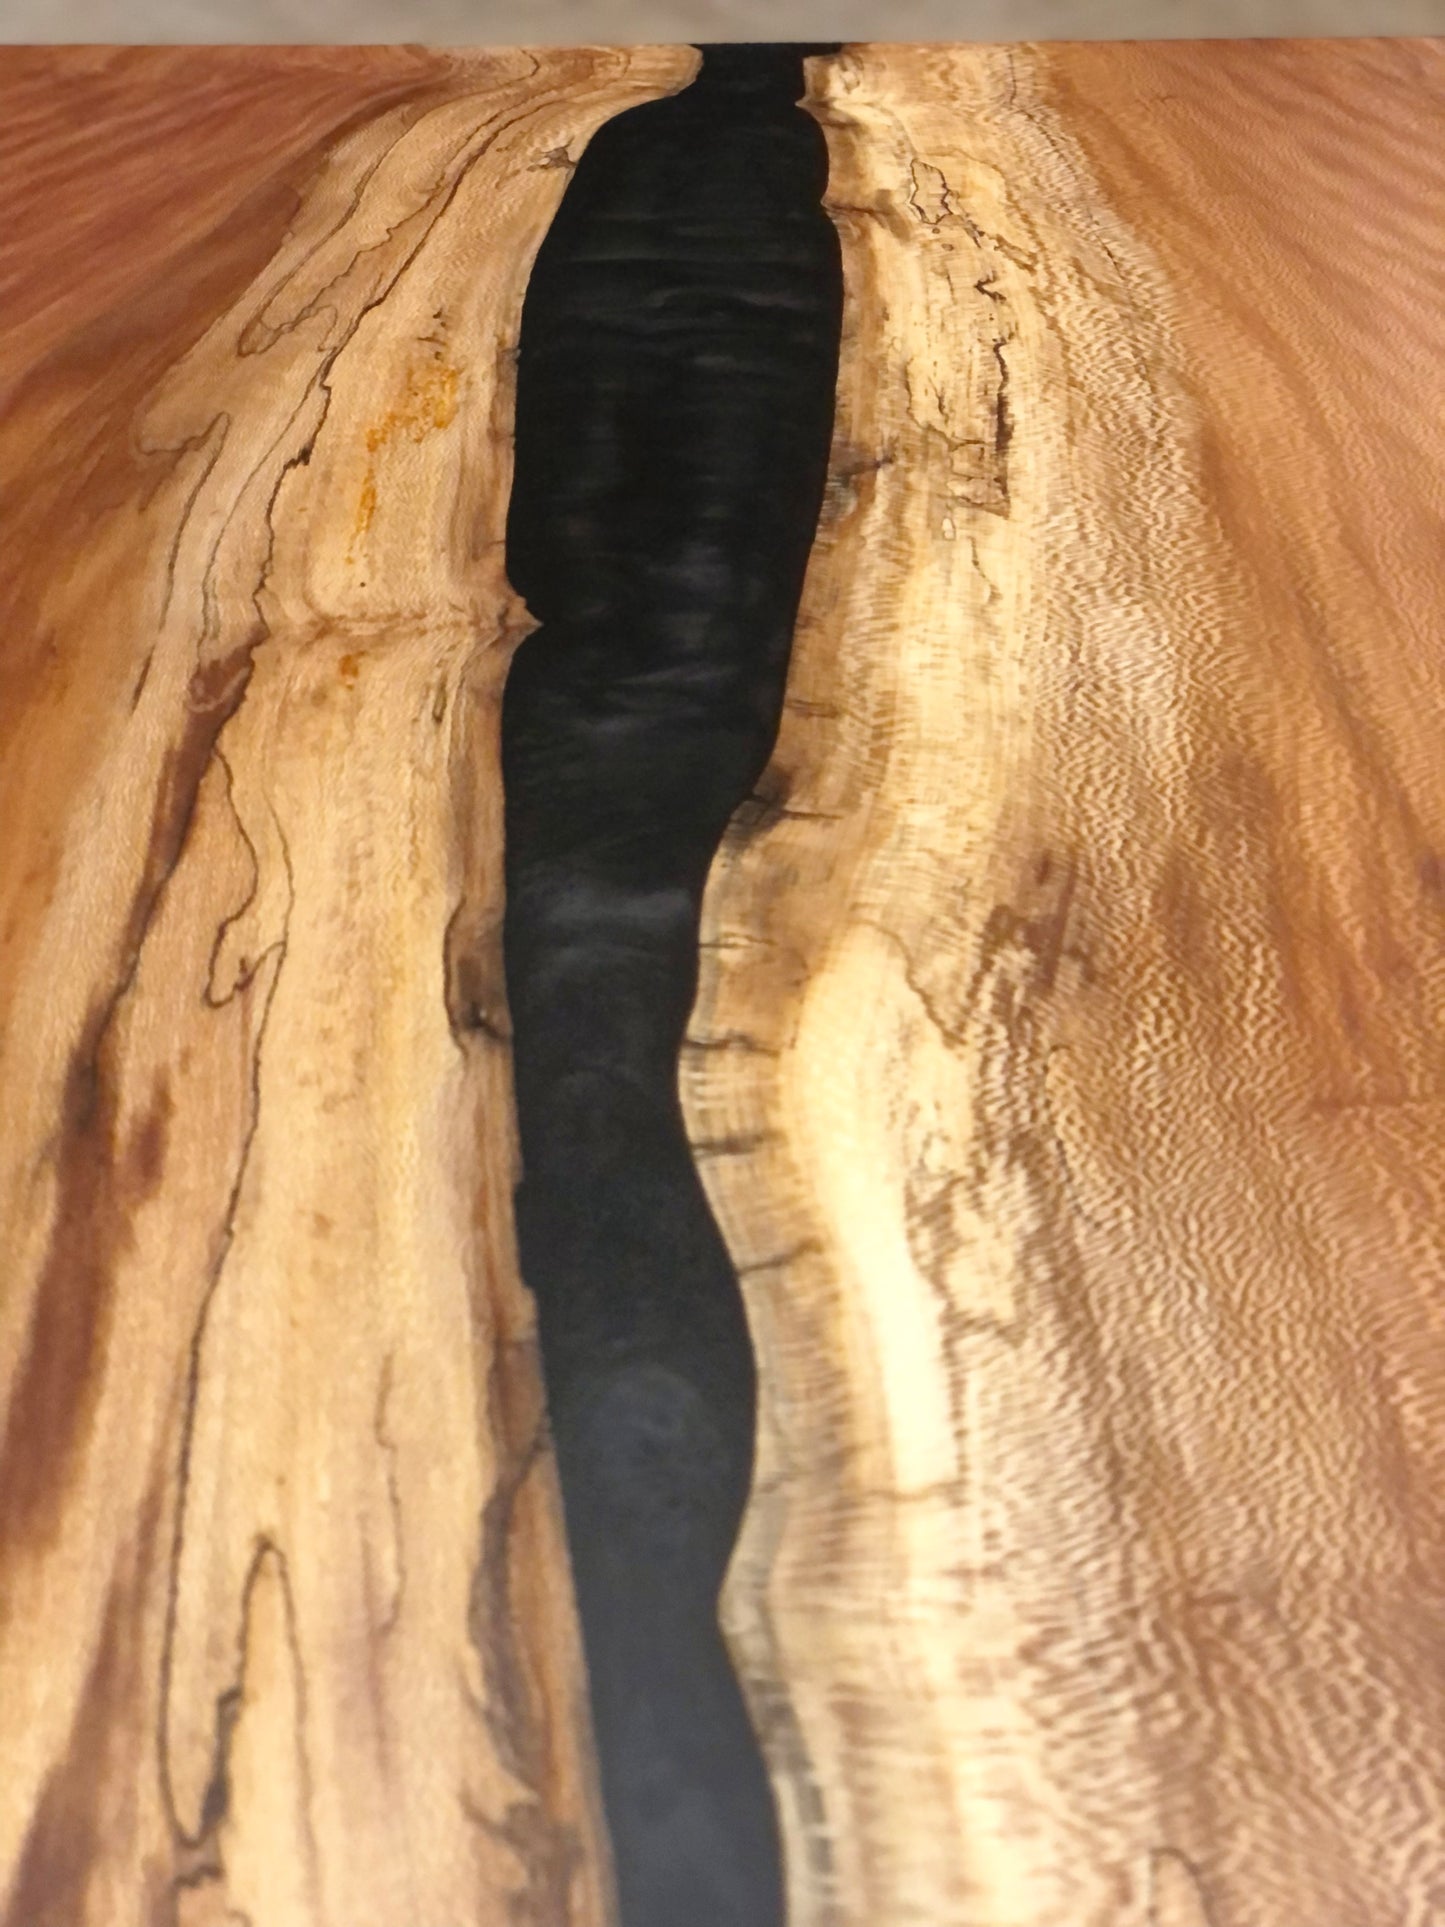 Sycamore and Metallic Black Epoxy Side Table Closeup View